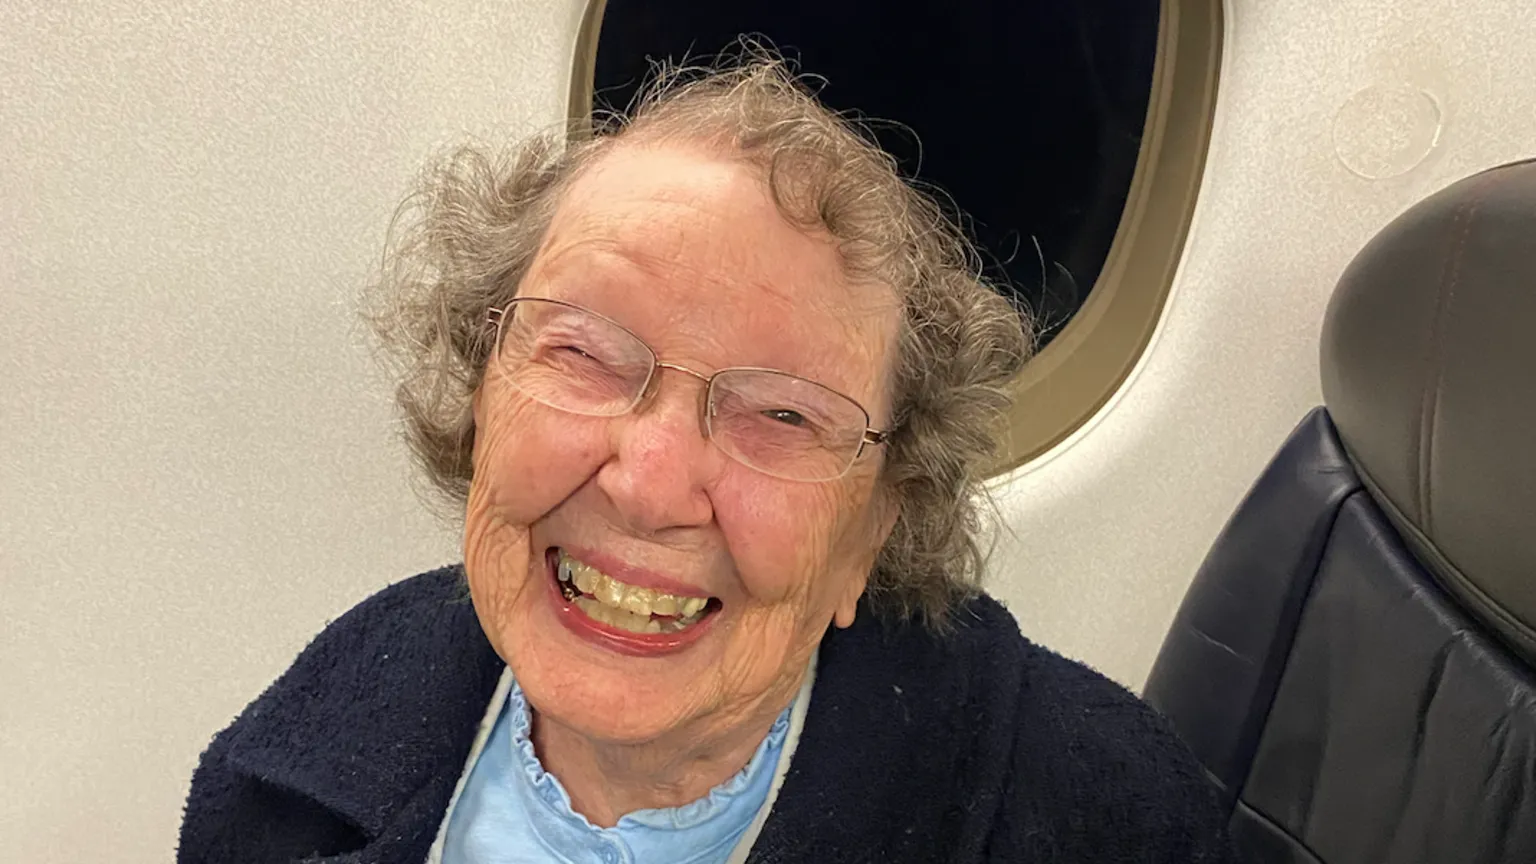 Airline keeps mistaking 101-year-old woman for baby (bbc.com)